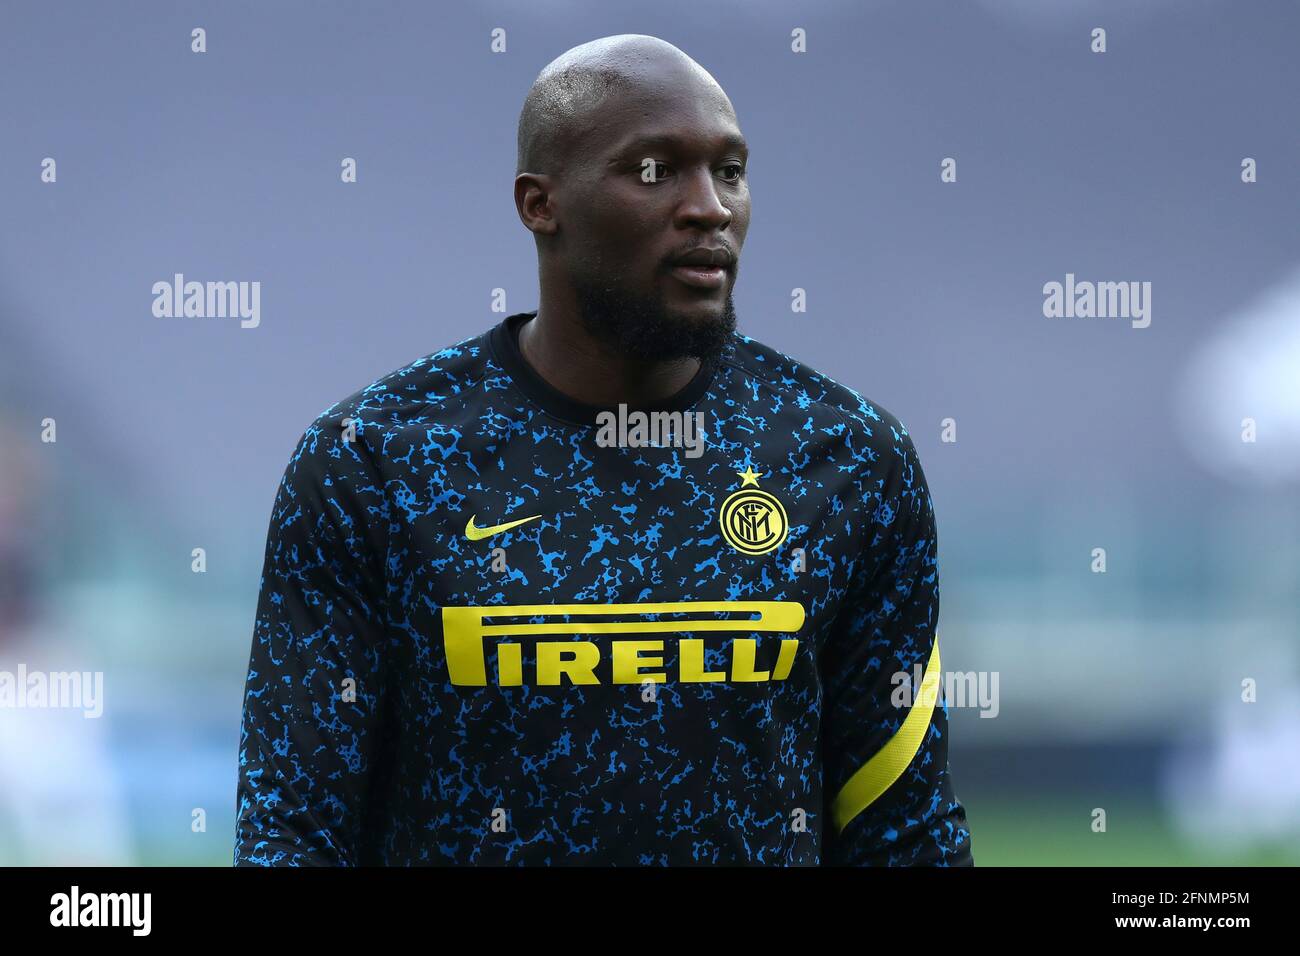 Romelu Lukaku of Fc Internazionale  during warm up before the Serie A match between Juventus Fc and Fc Internazionale. Stock Photo